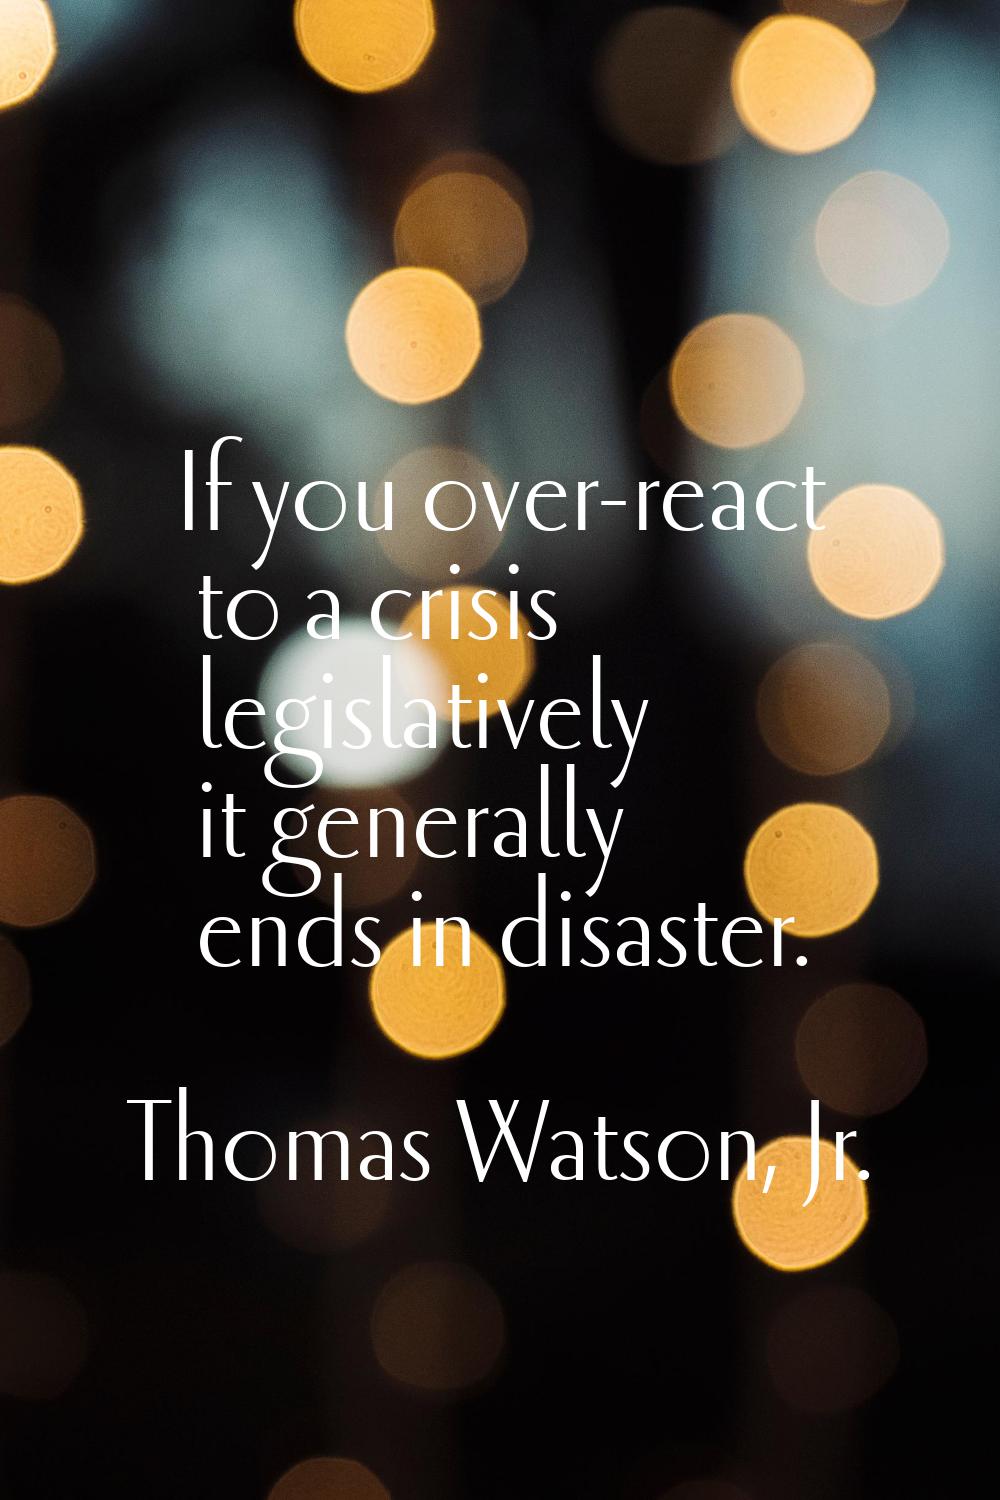 If you over-react to a crisis legislatively it generally ends in disaster.